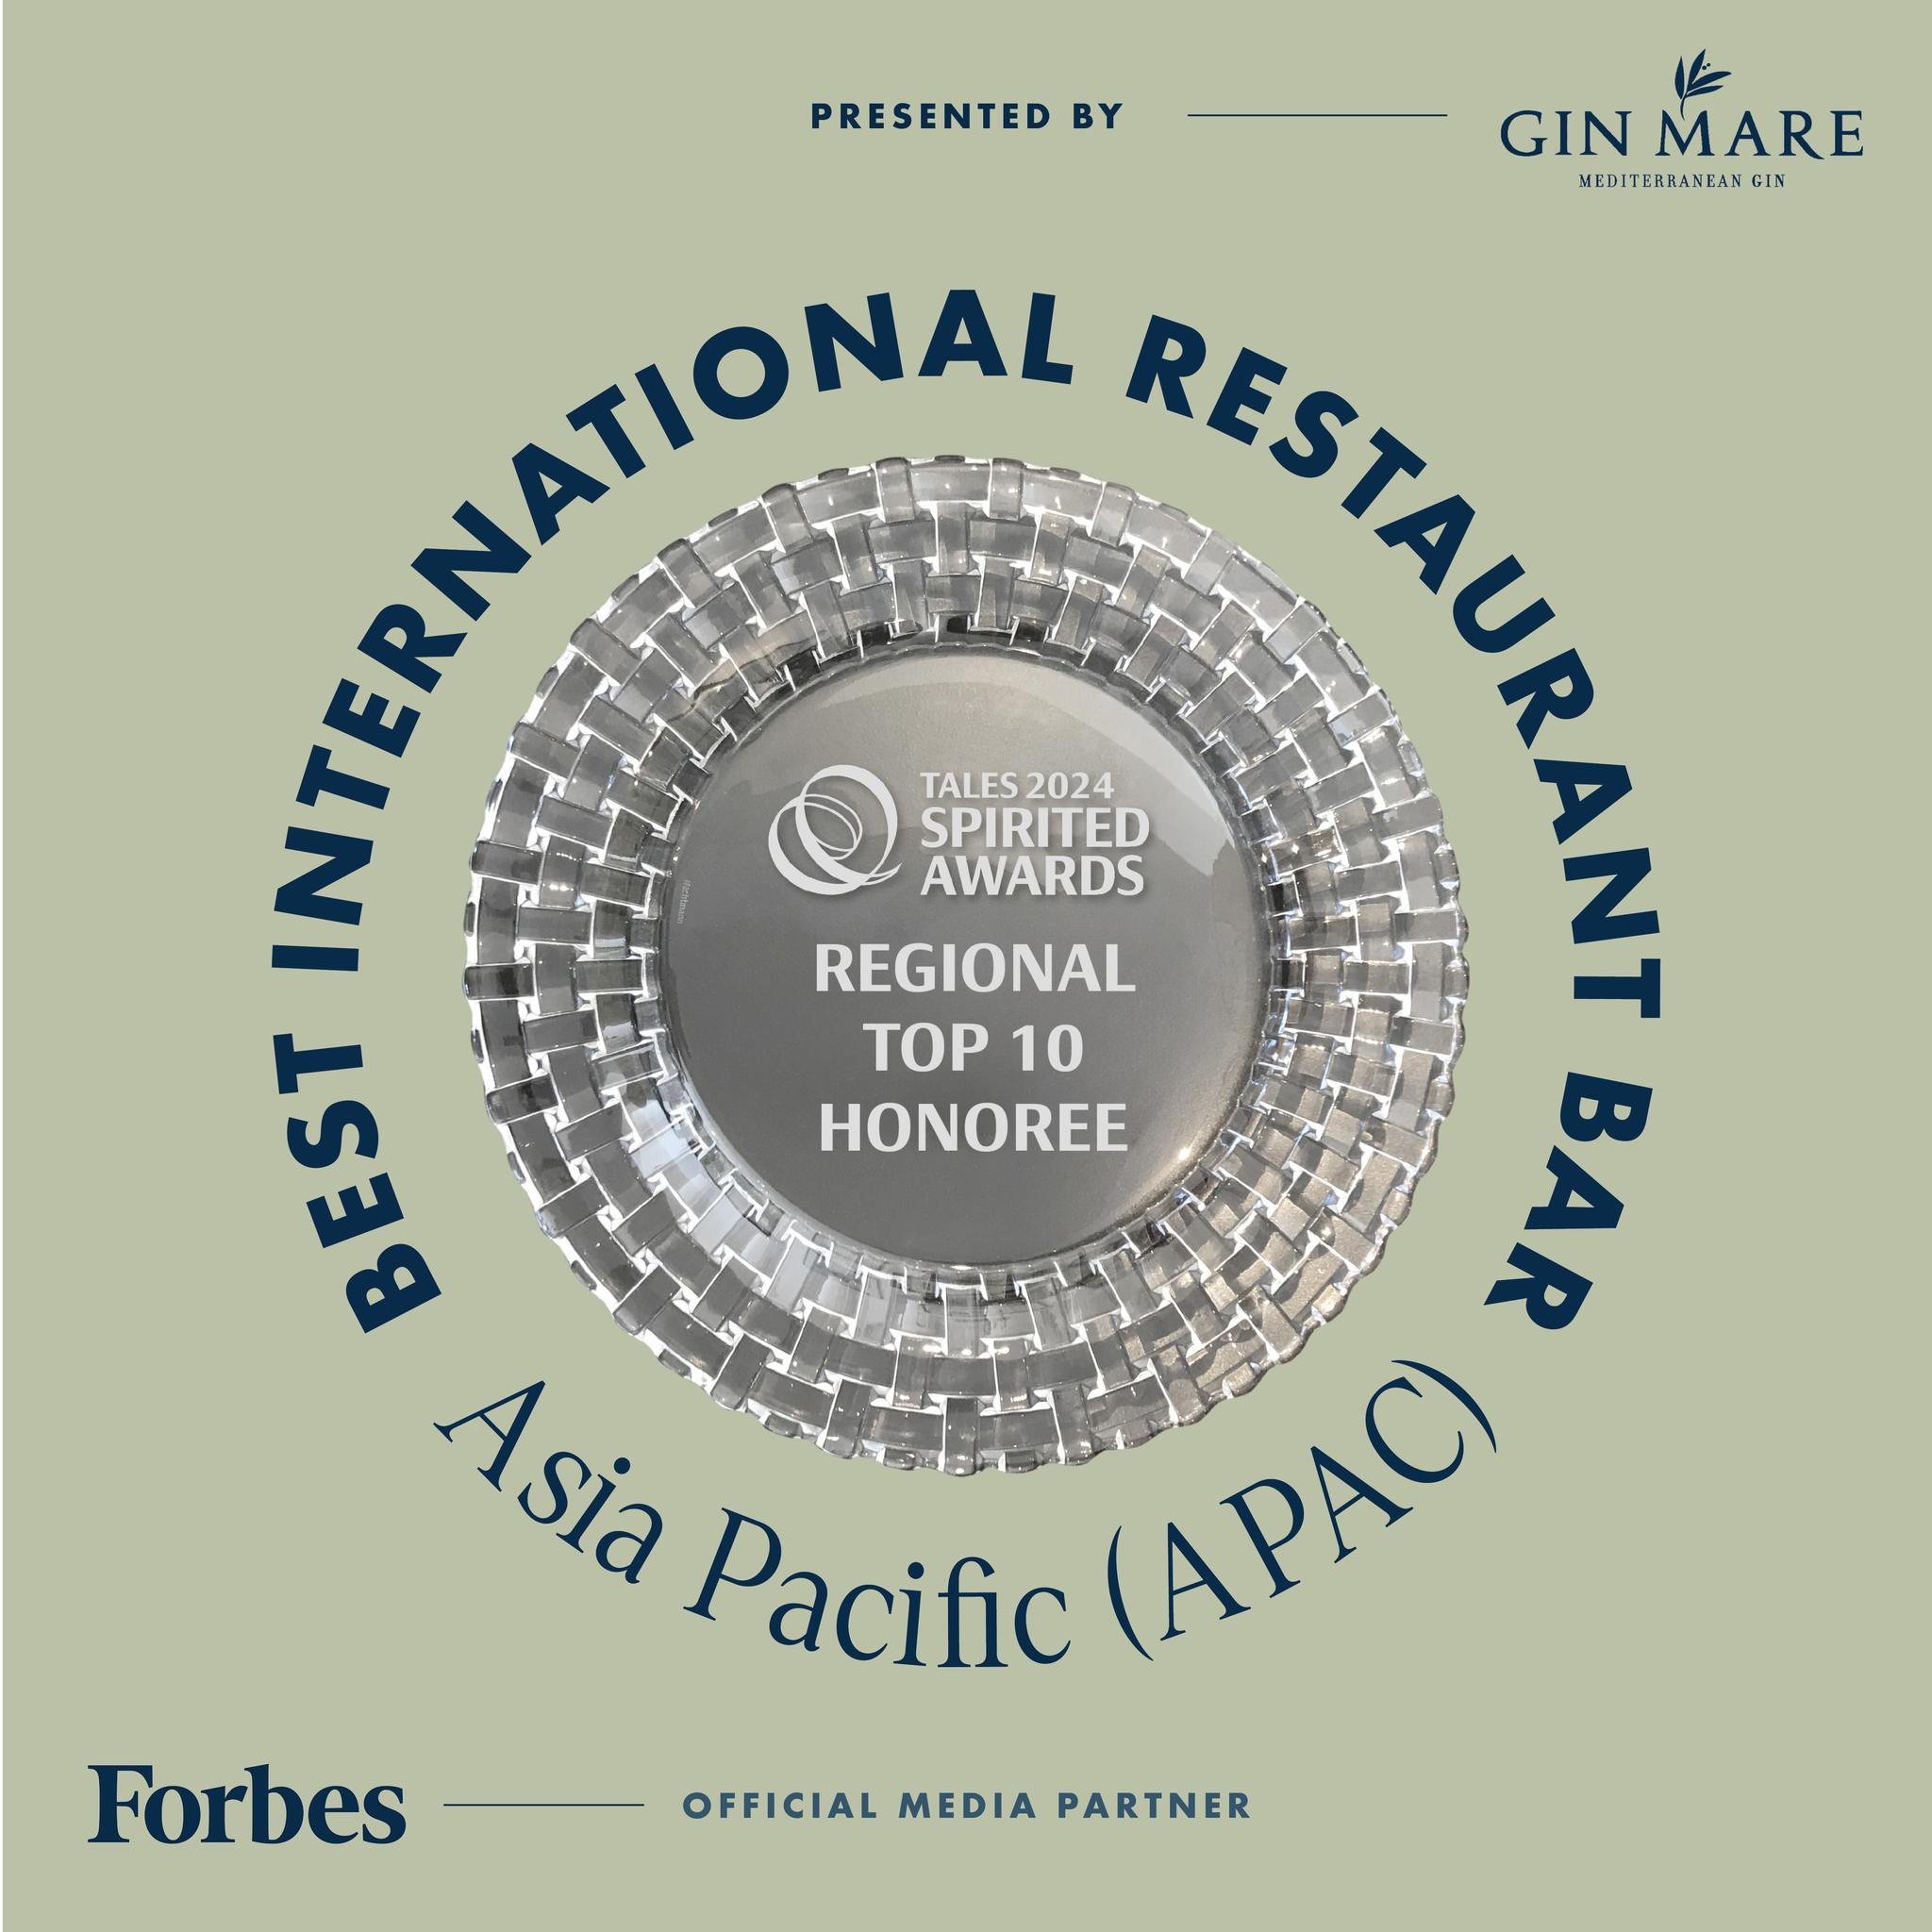 Caffe Fernet is proud to be nominated as a Top 10 Best International Restaurant Bar in Asia Pacific, at the 2024 Tales of the Cocktail Foundation&rsquo;s Spirted Awards 🎉

We are truly thankful to everyone who have continuously supported our new-Ita